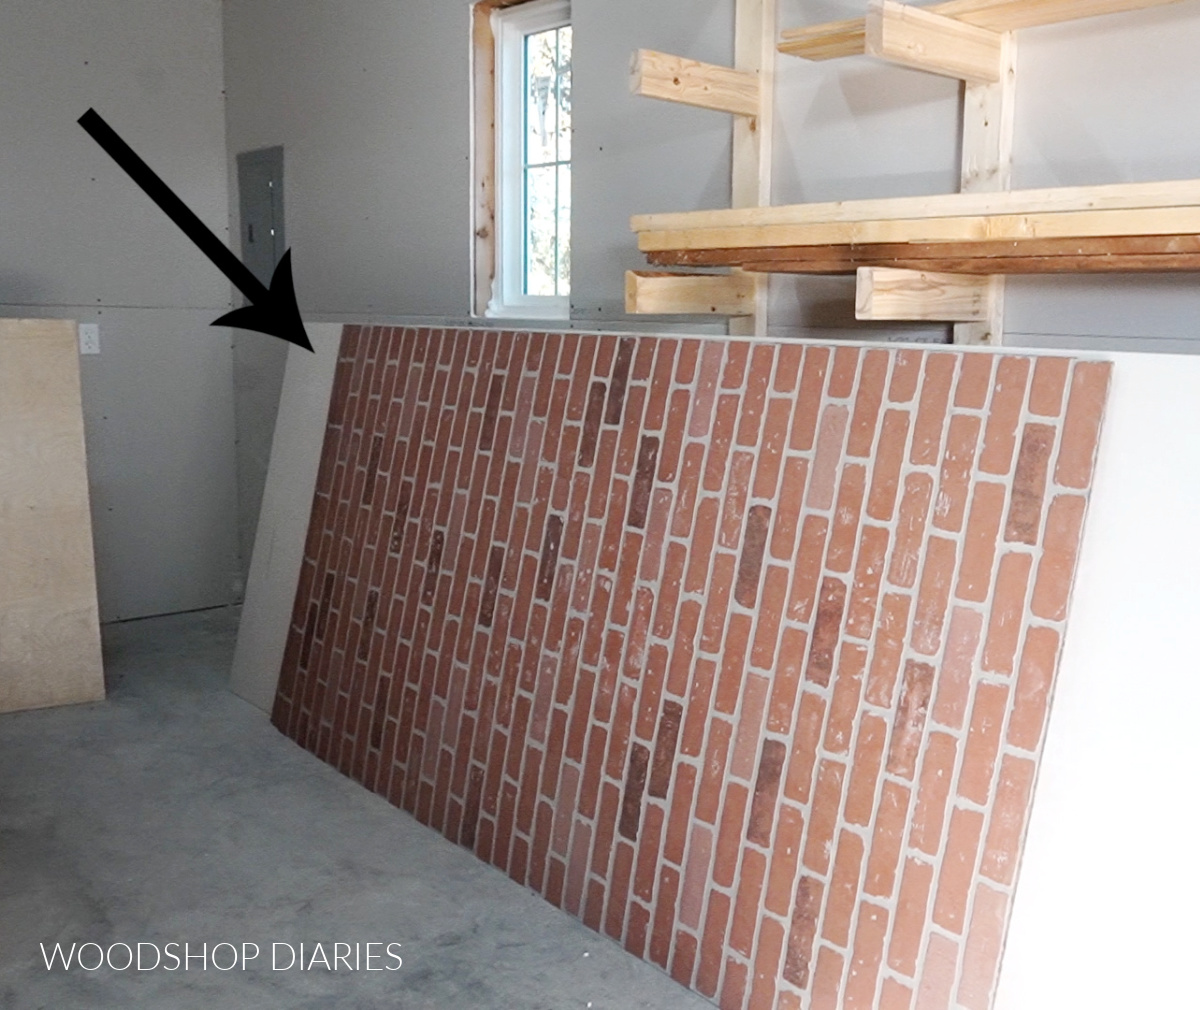 Faux brick paneling leaning against wall in workshop